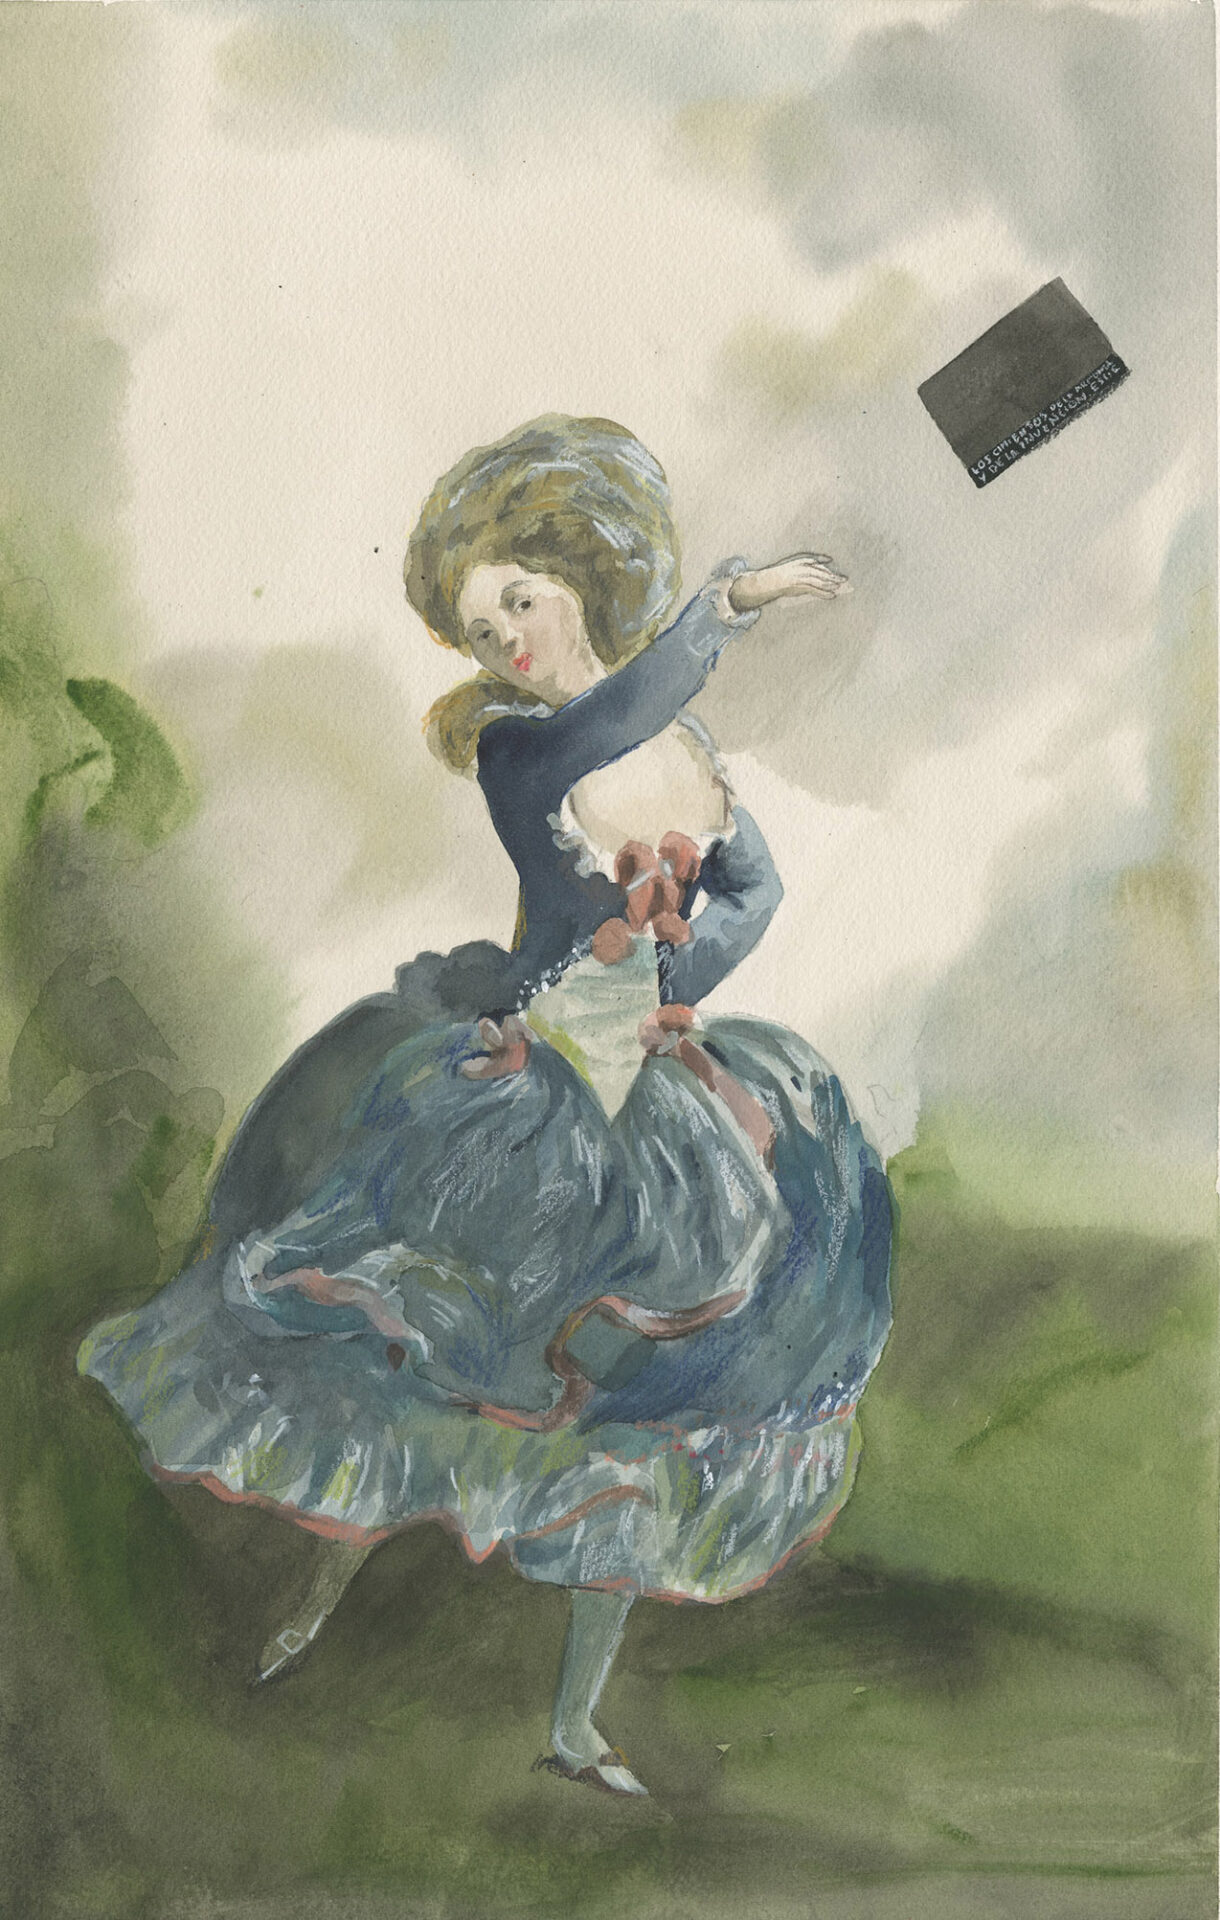 a watercolor painting of an 18th-century woman throwing a black book